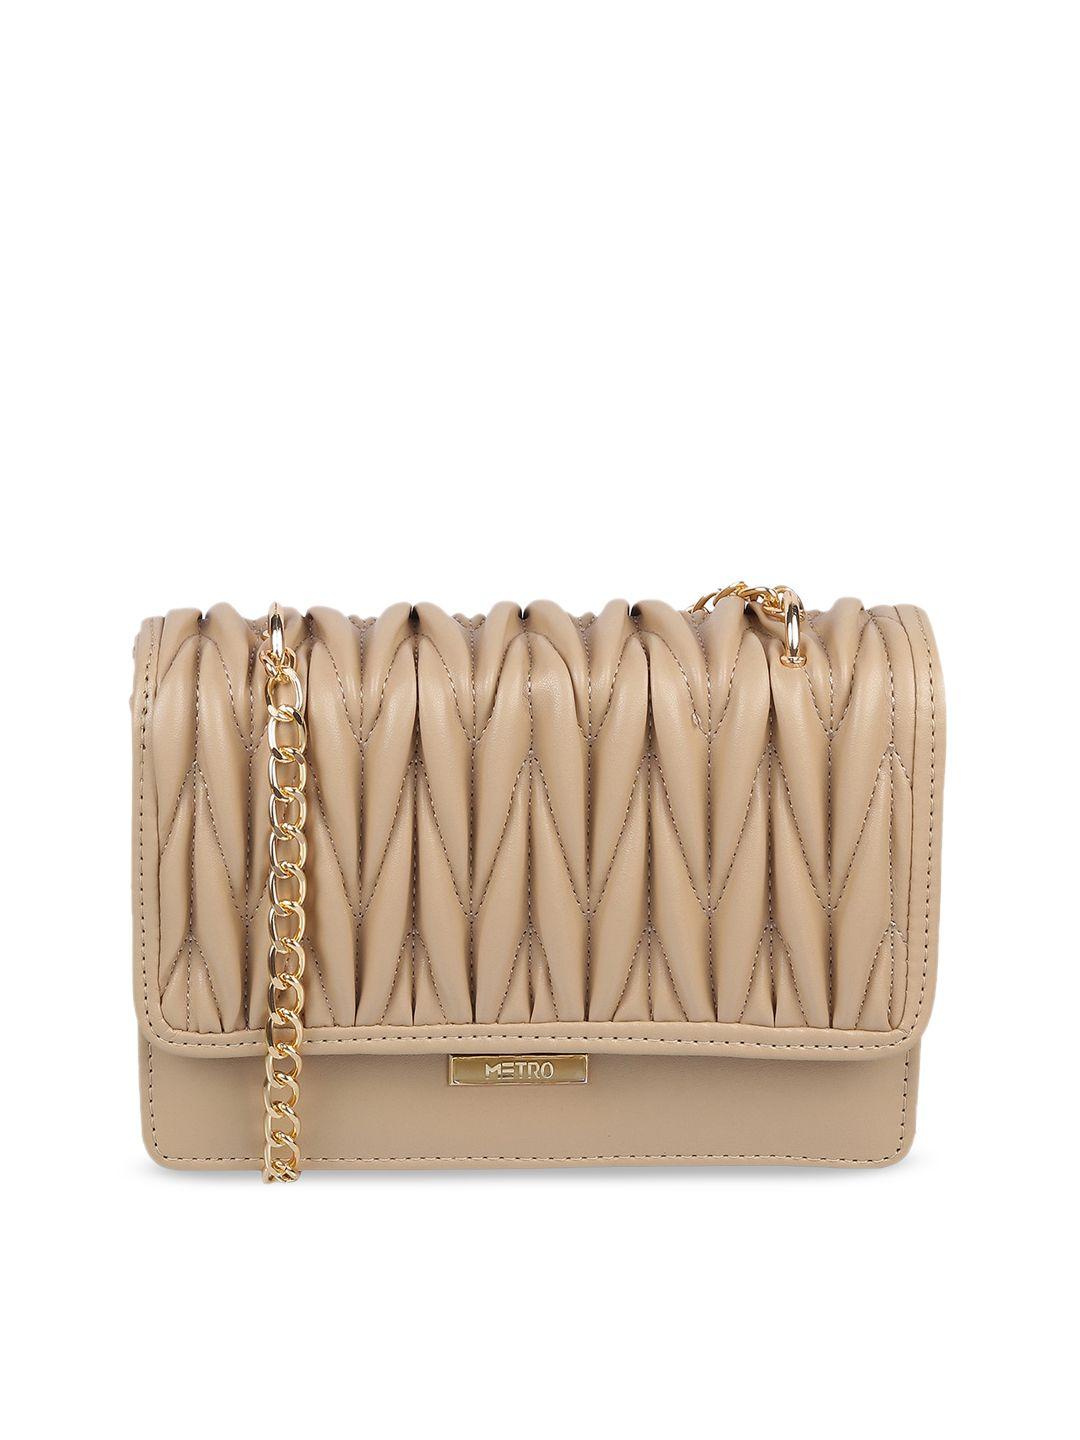 metro textured structured sling bag with quilted